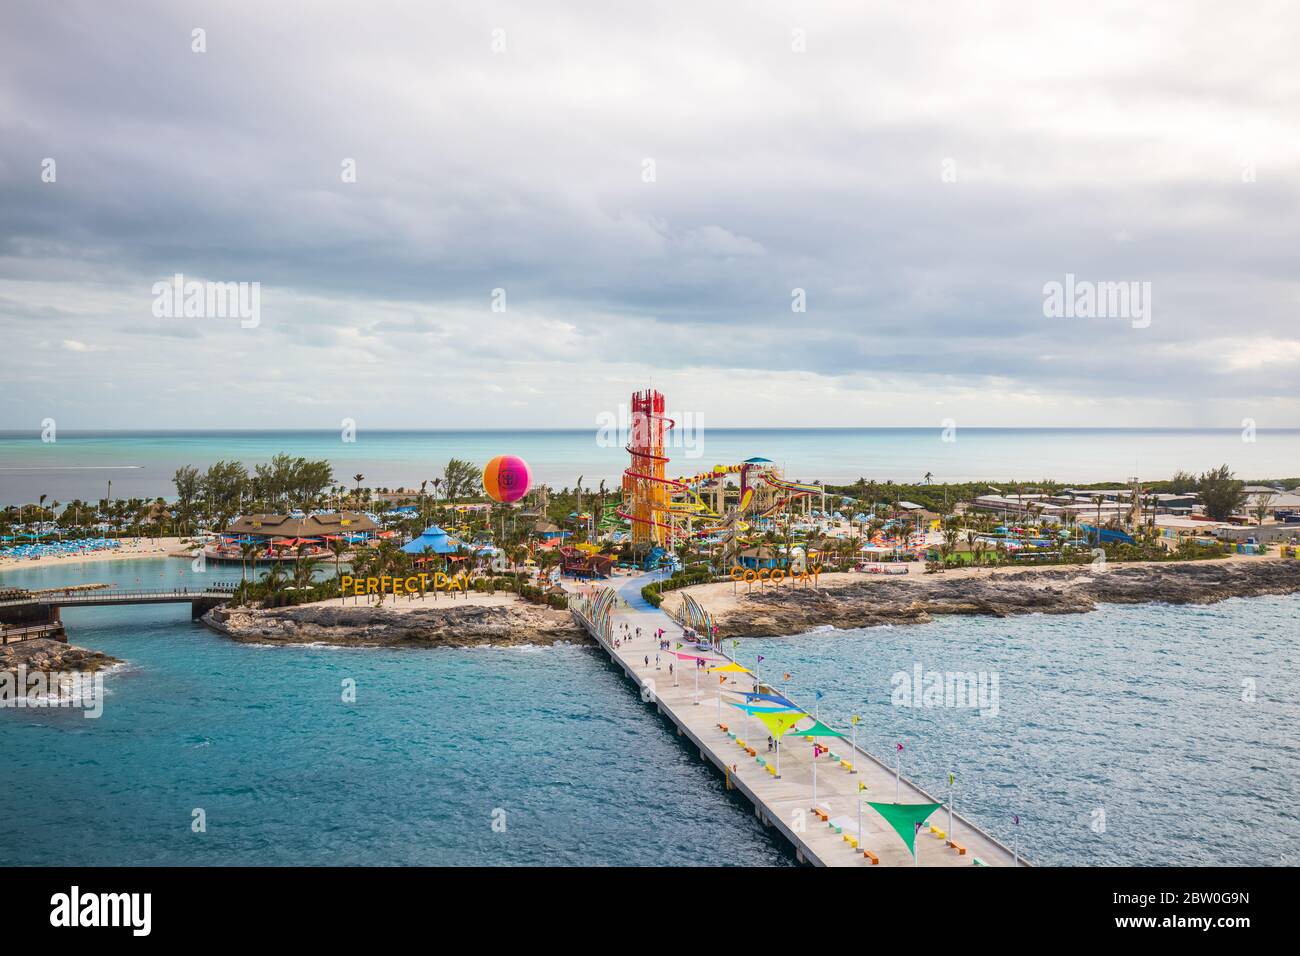 An aerial/drone view of Cococay, the private island post that's owned by the Royal Caribbean cruise line where guests can spend the day having fun. Stock Photo